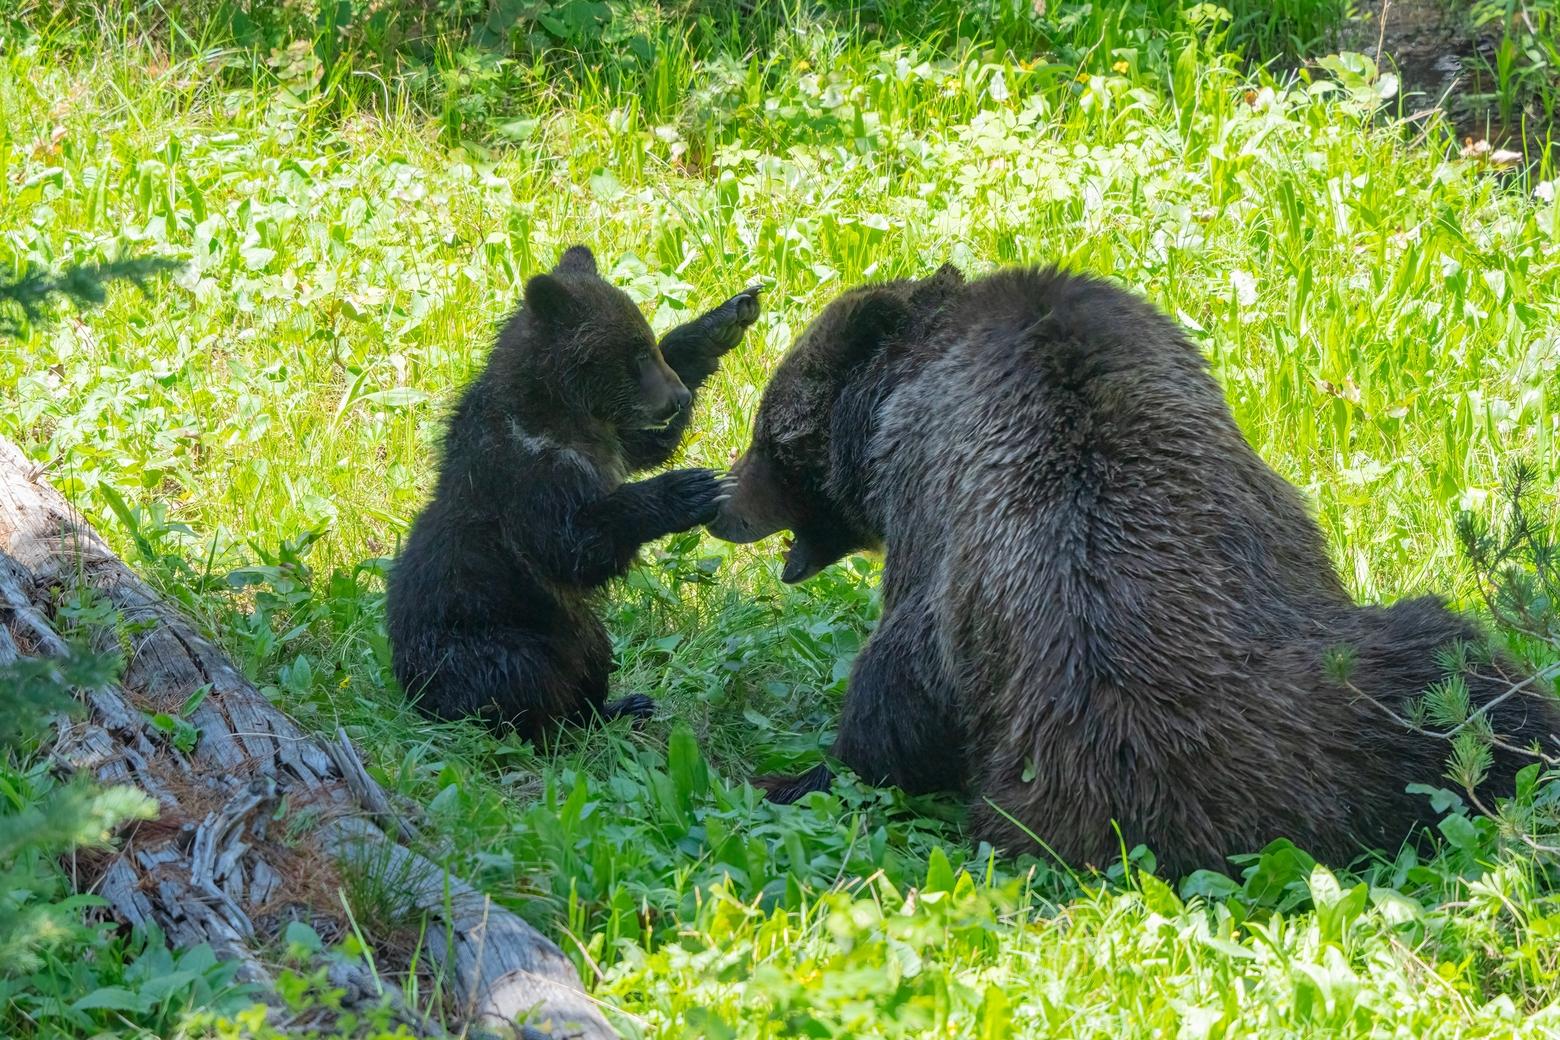 Is that a smile on 399's face as her cub mimics being a full-grown grizzly trying to scare its mother with infant growls? 